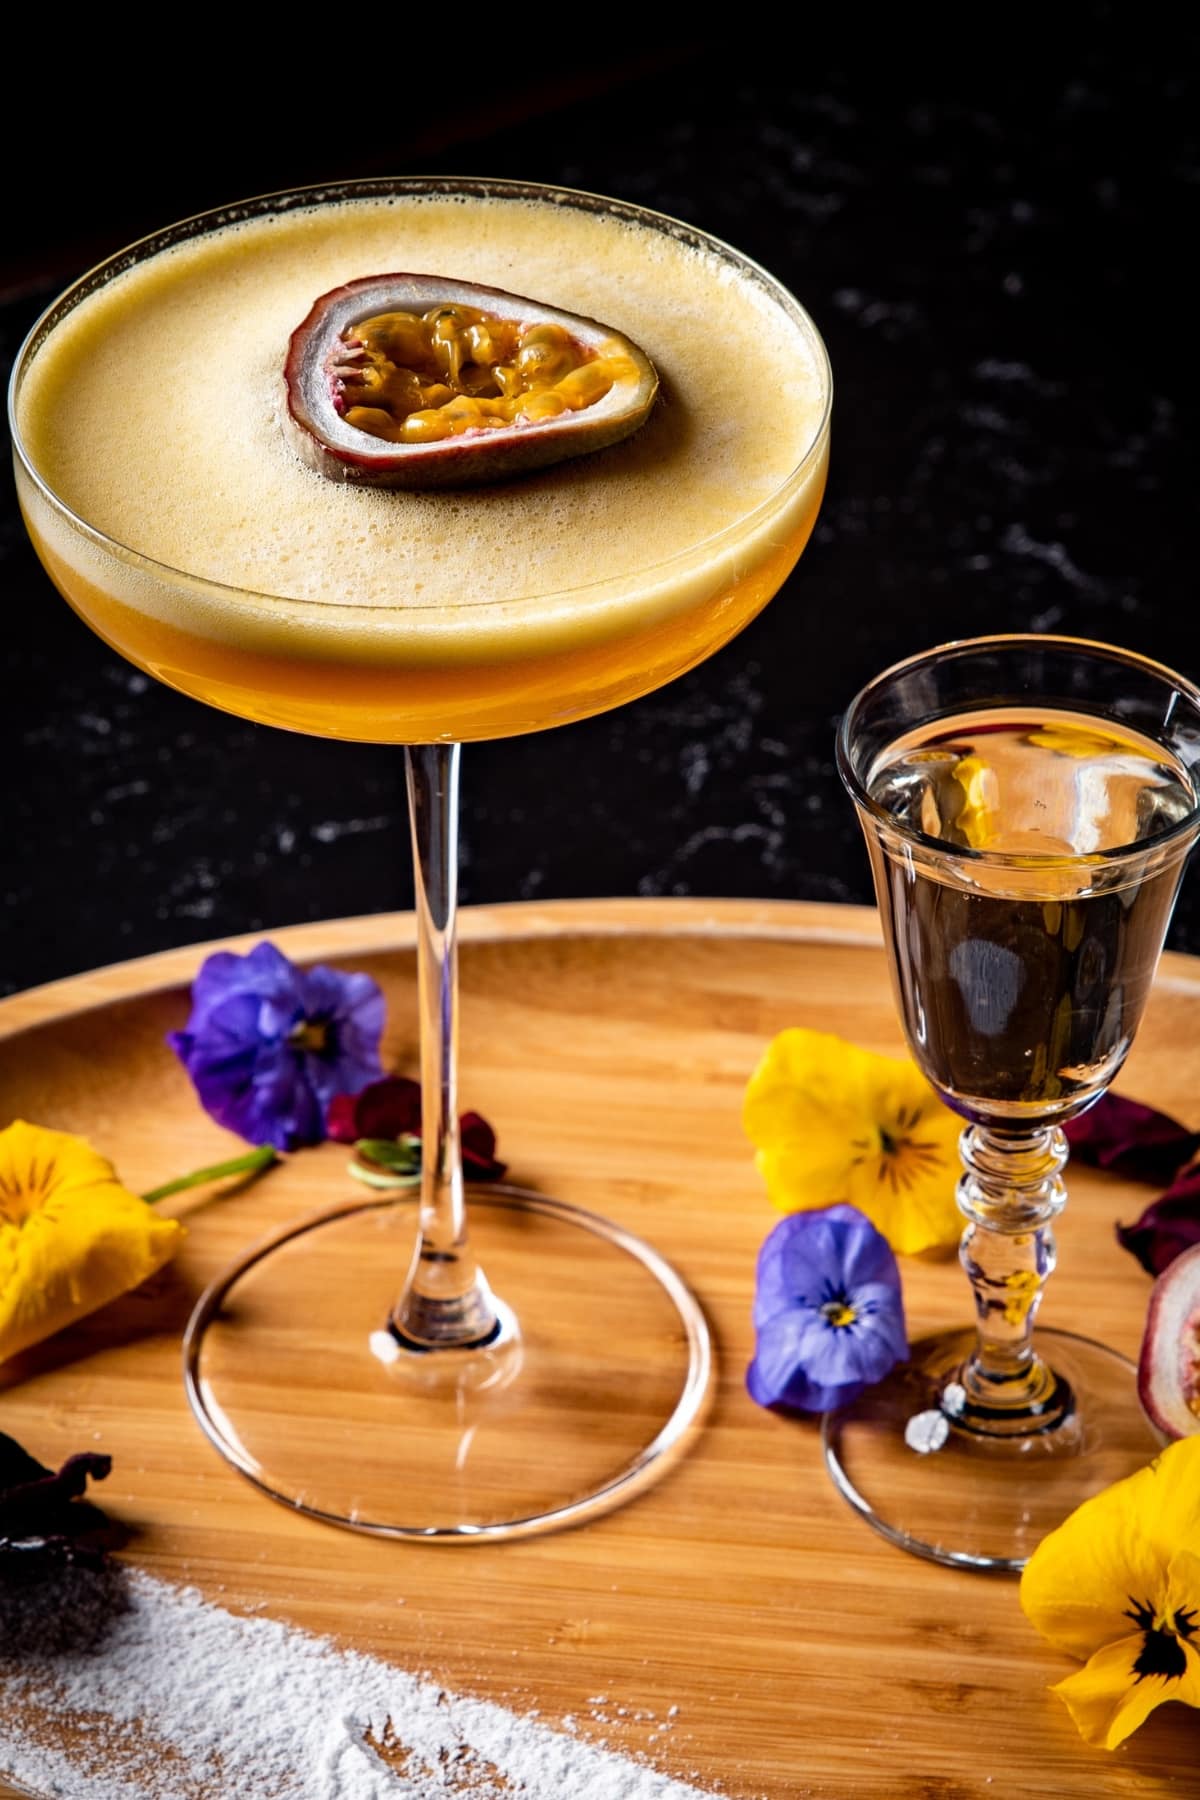 Porn star martini and Prosecco garnished with passion fruit served on a wooden tray.